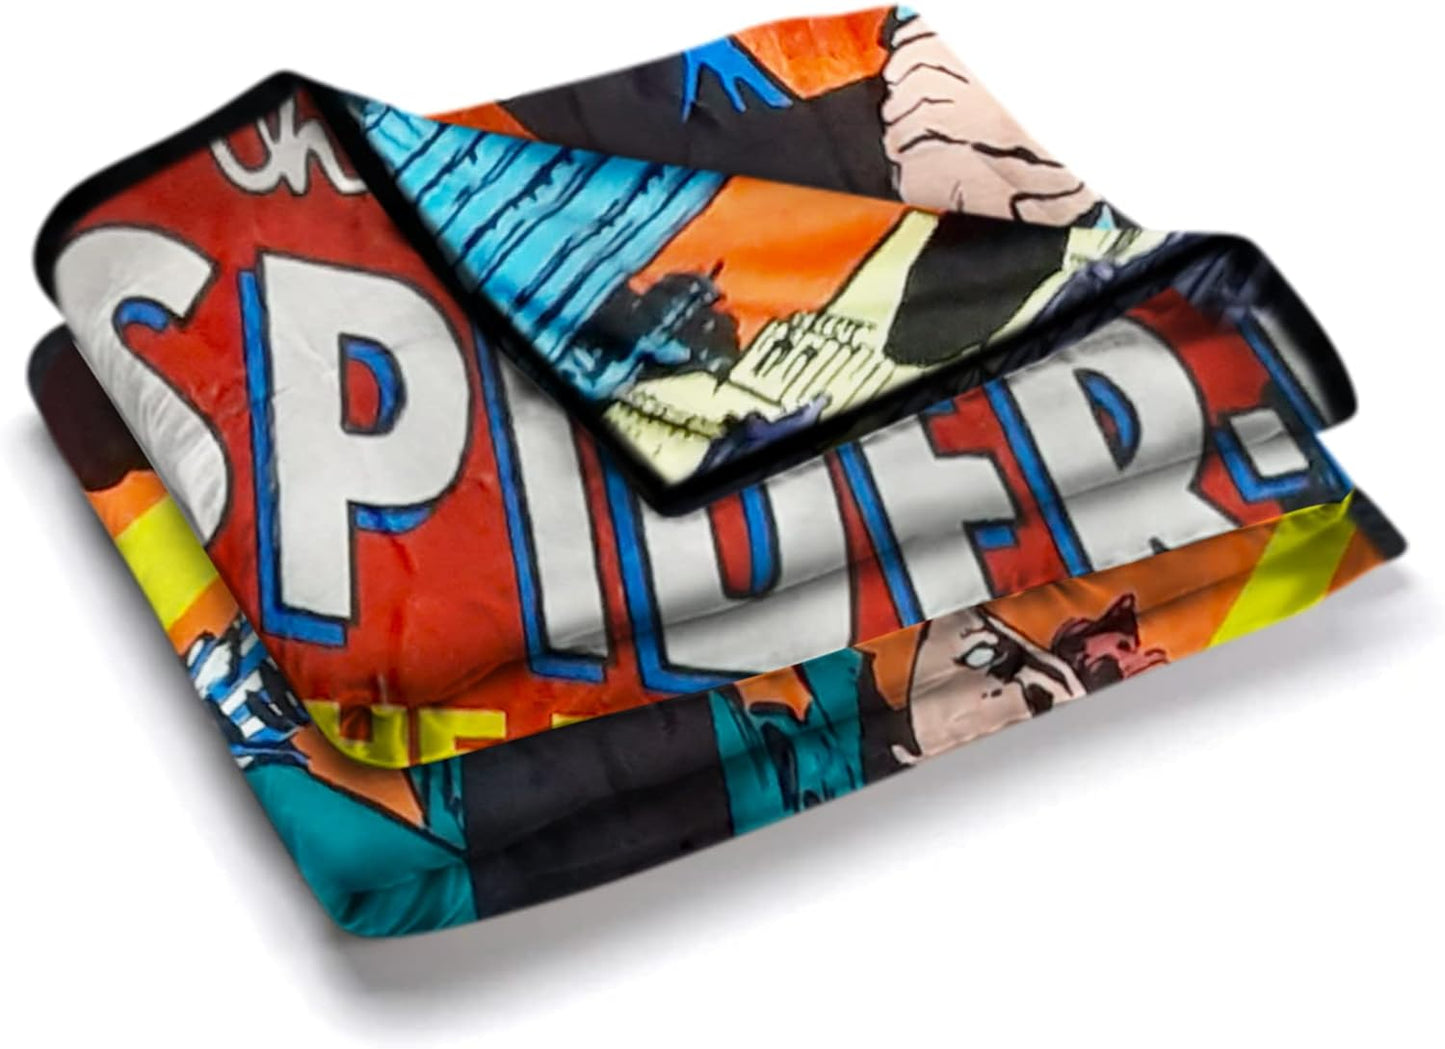 Marvel The Amazing Spider-Man Fleece Softest Throw Blanket| Measures 60 x 45 Inches